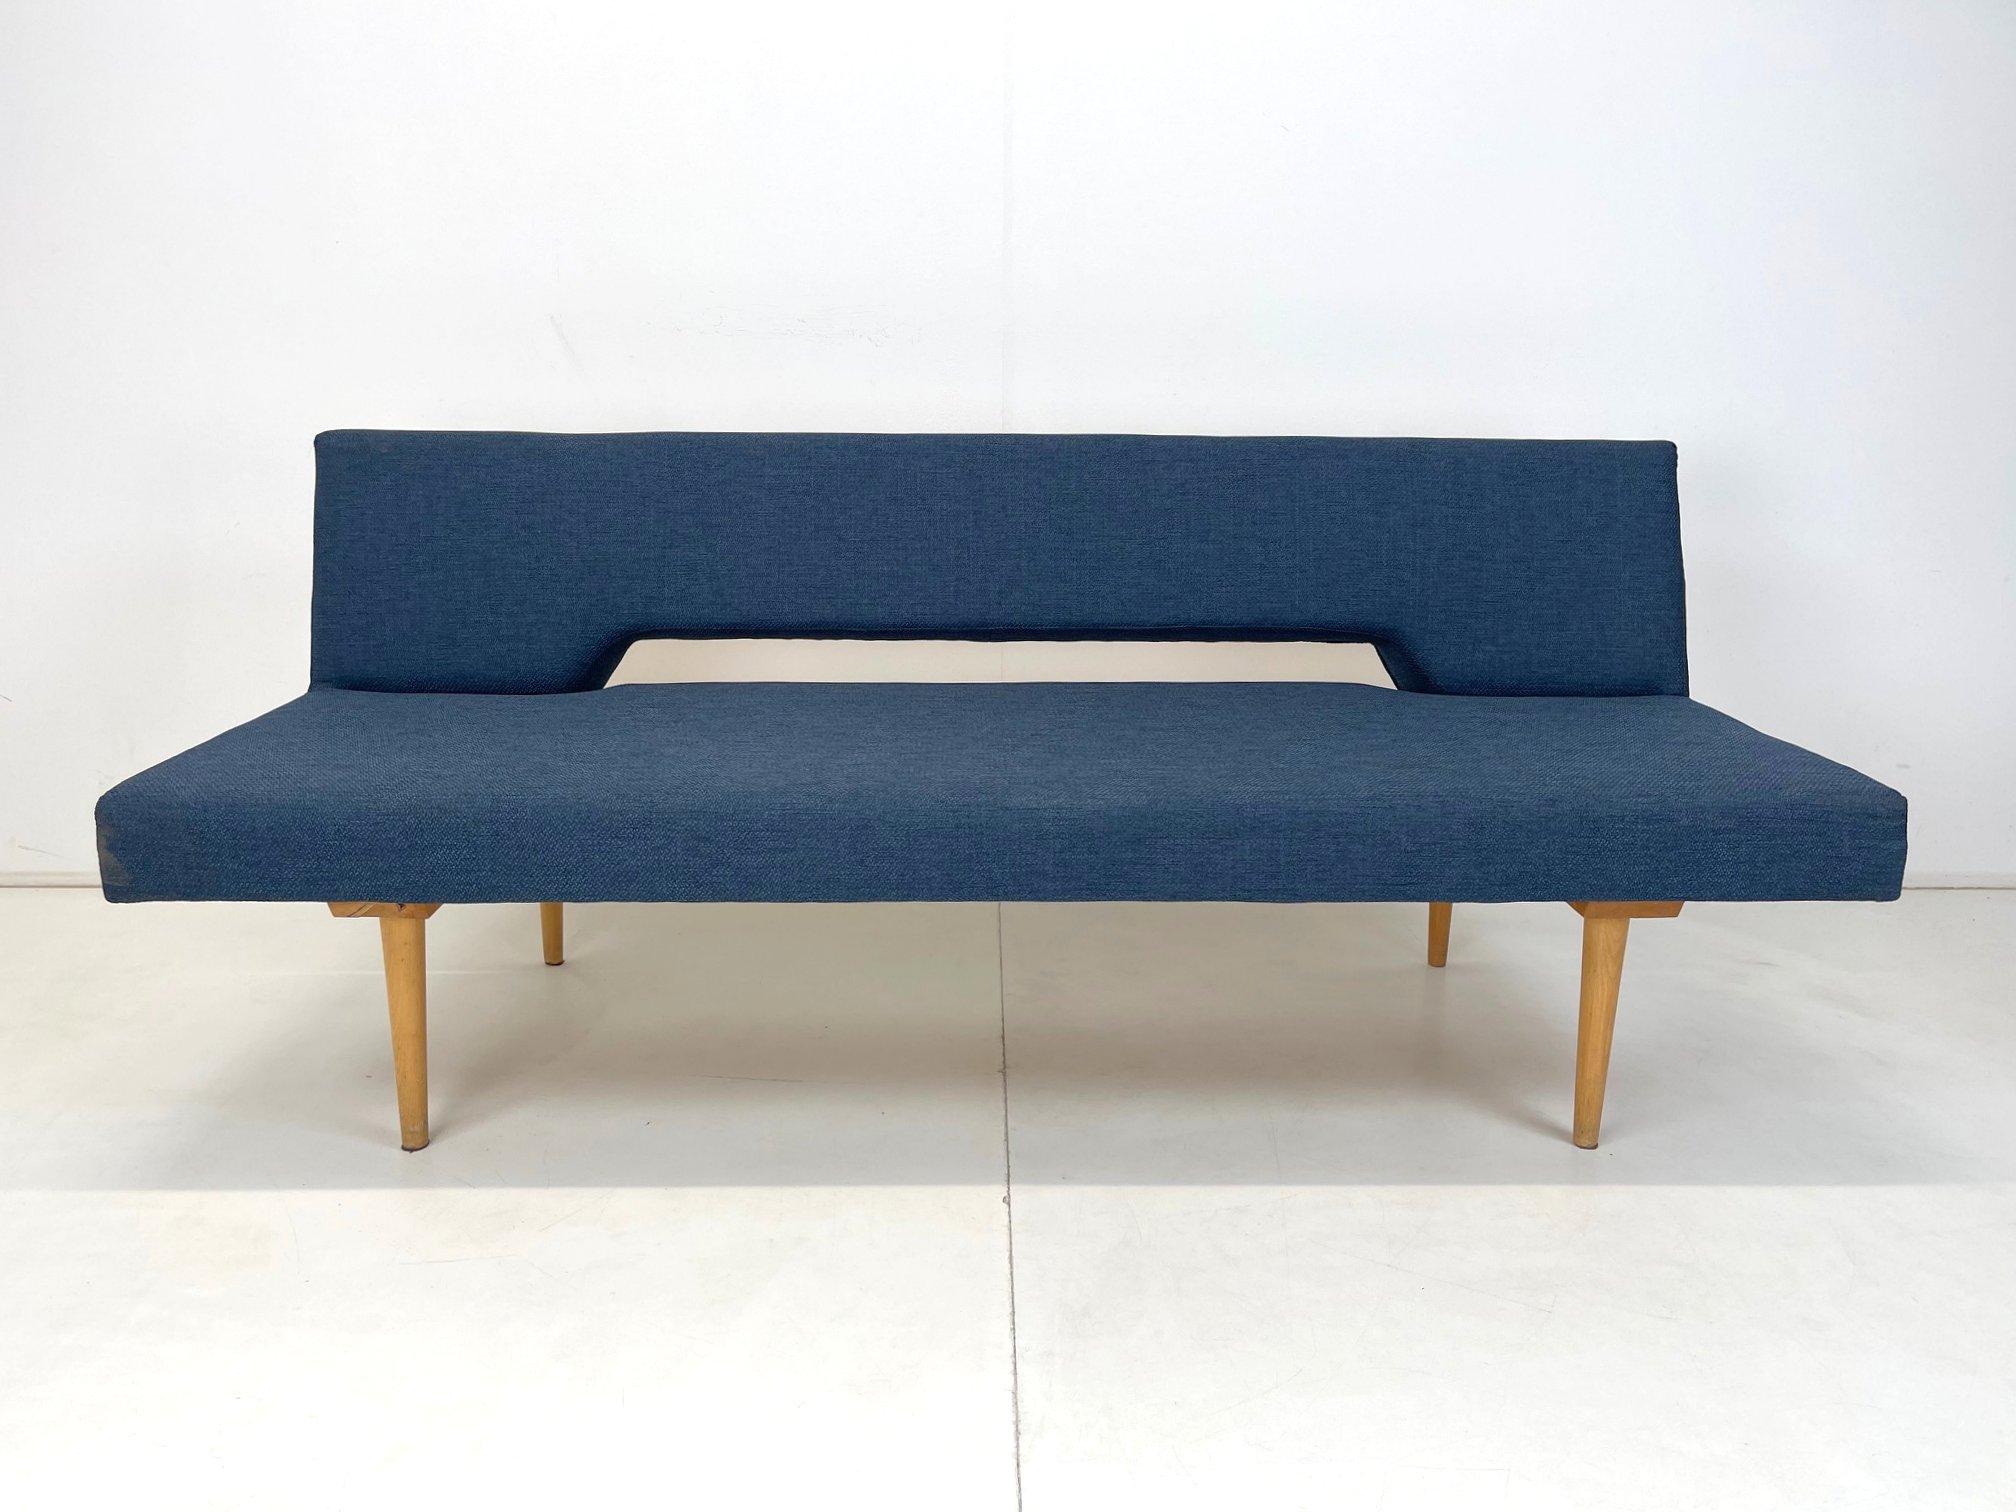 Iconic model by Interier Praha, produced in the 1960's. When unfolded, the bed measures 186 cm in width. Newly upholstered.